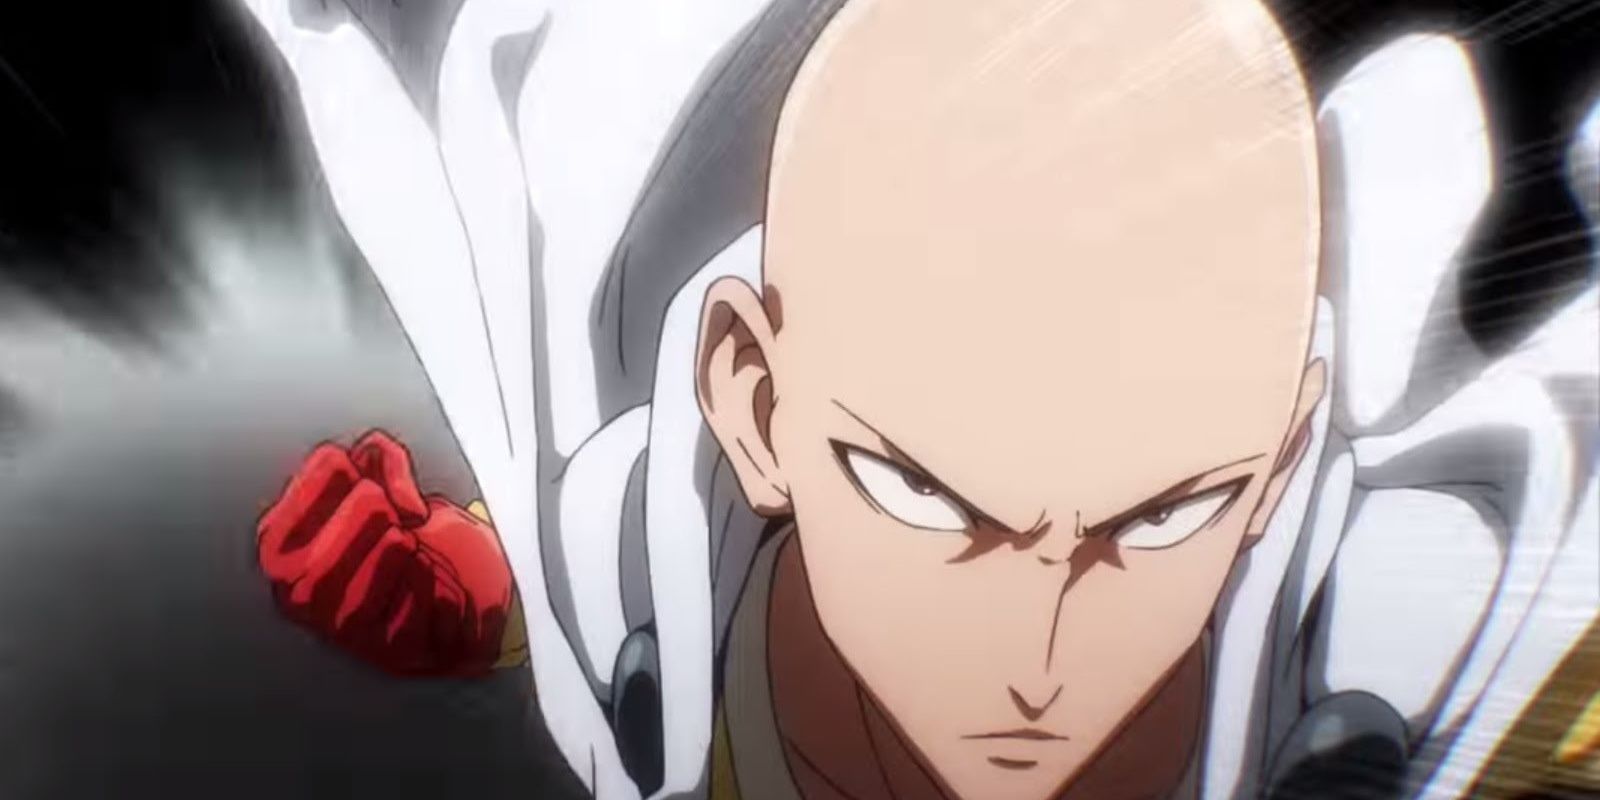 3. "Saitama" from One Punch Man - wide 2